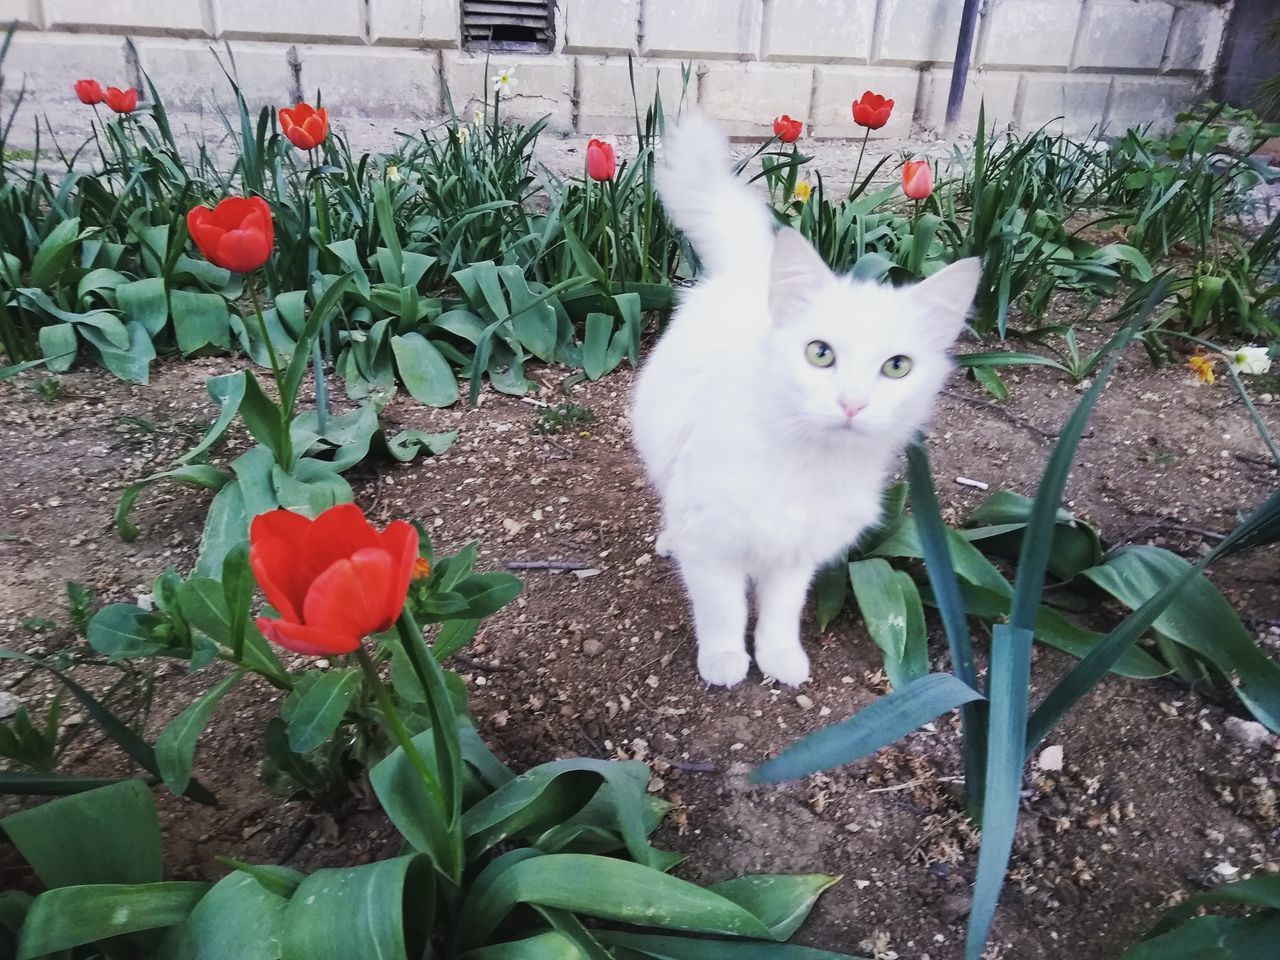 PORTRAIT OF CAT WITH FLOWERS